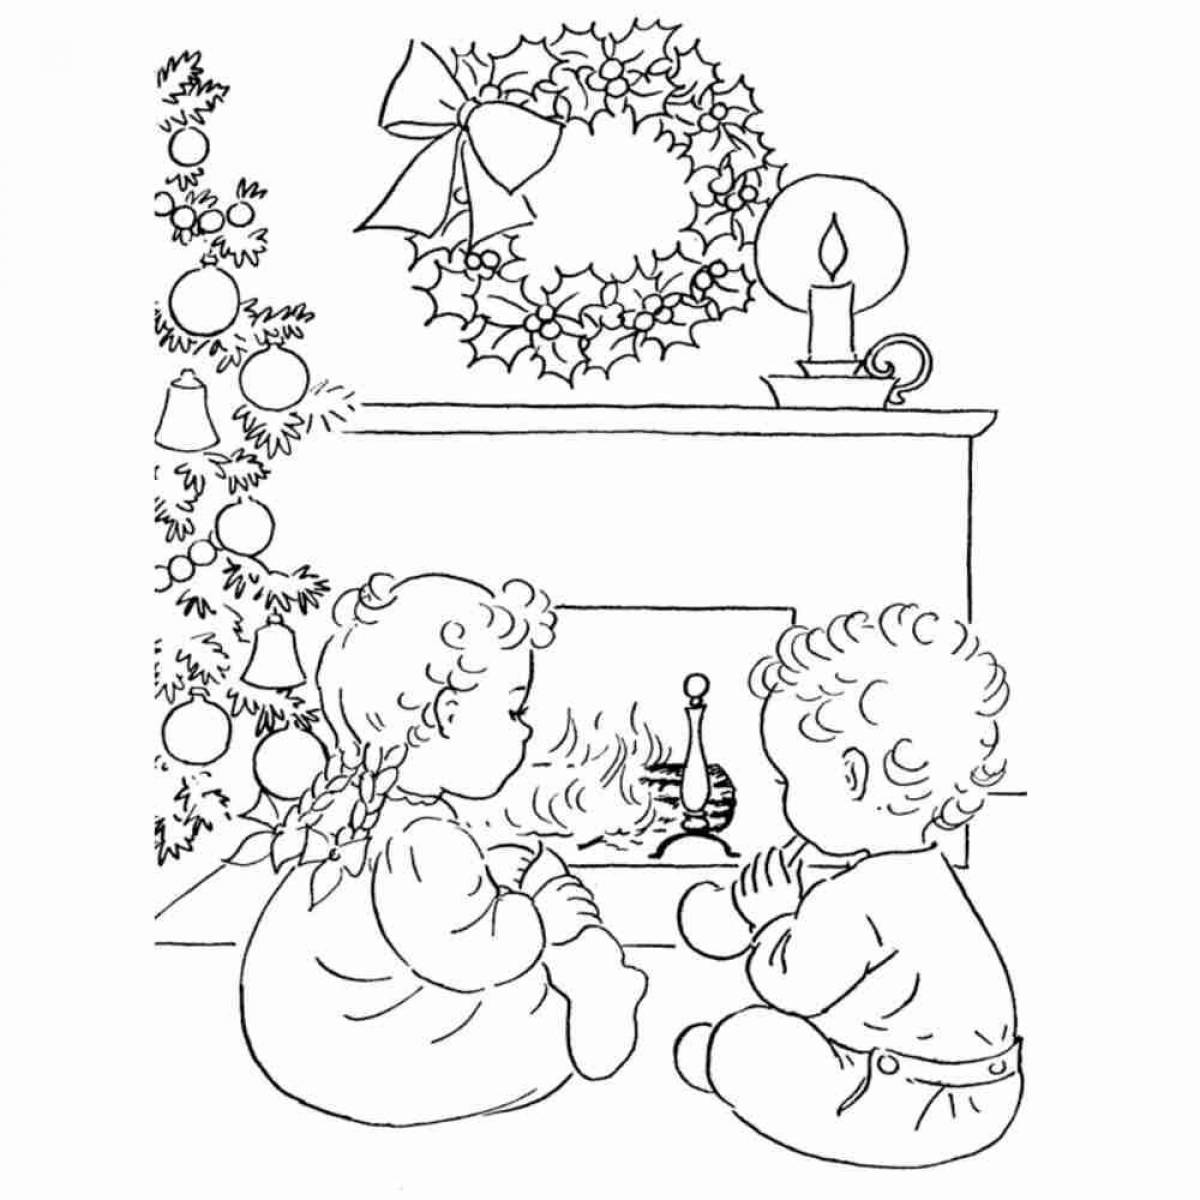 Merry Christmas coloring pages for 6-7 year olds